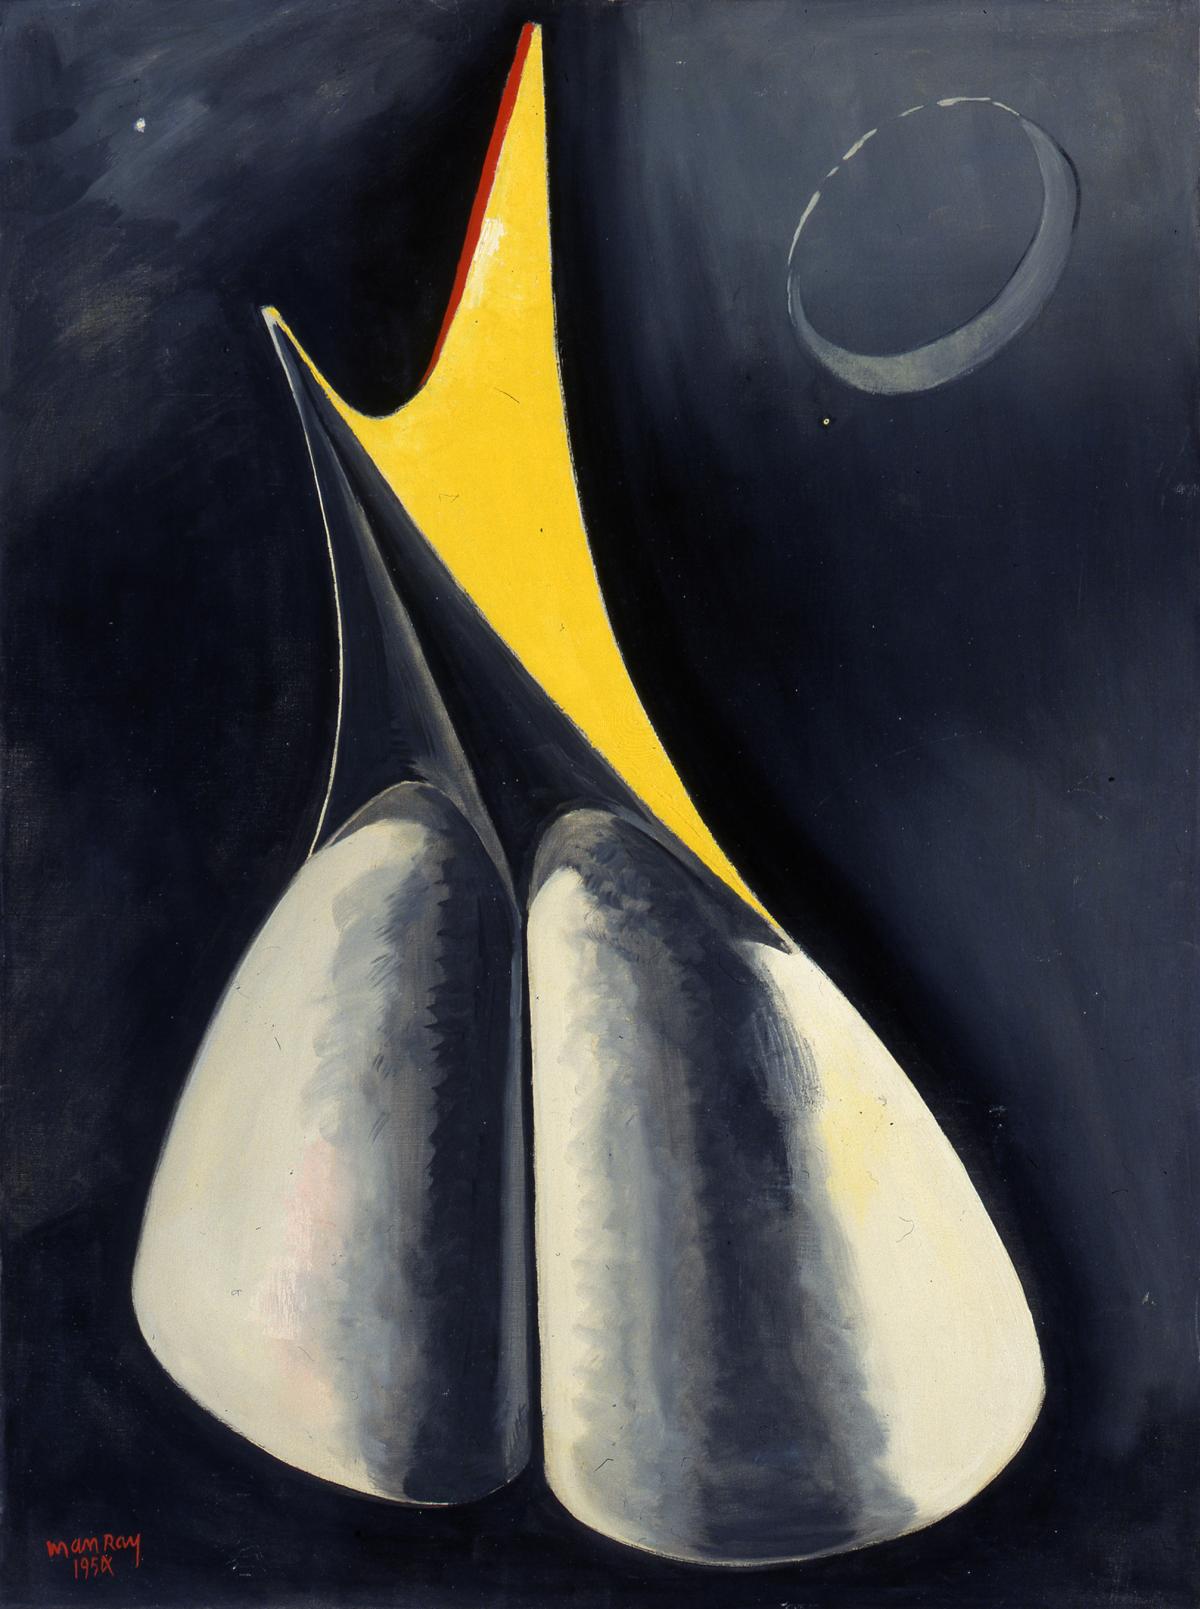 Man Ray's "Romeo and Juliet" (1954)